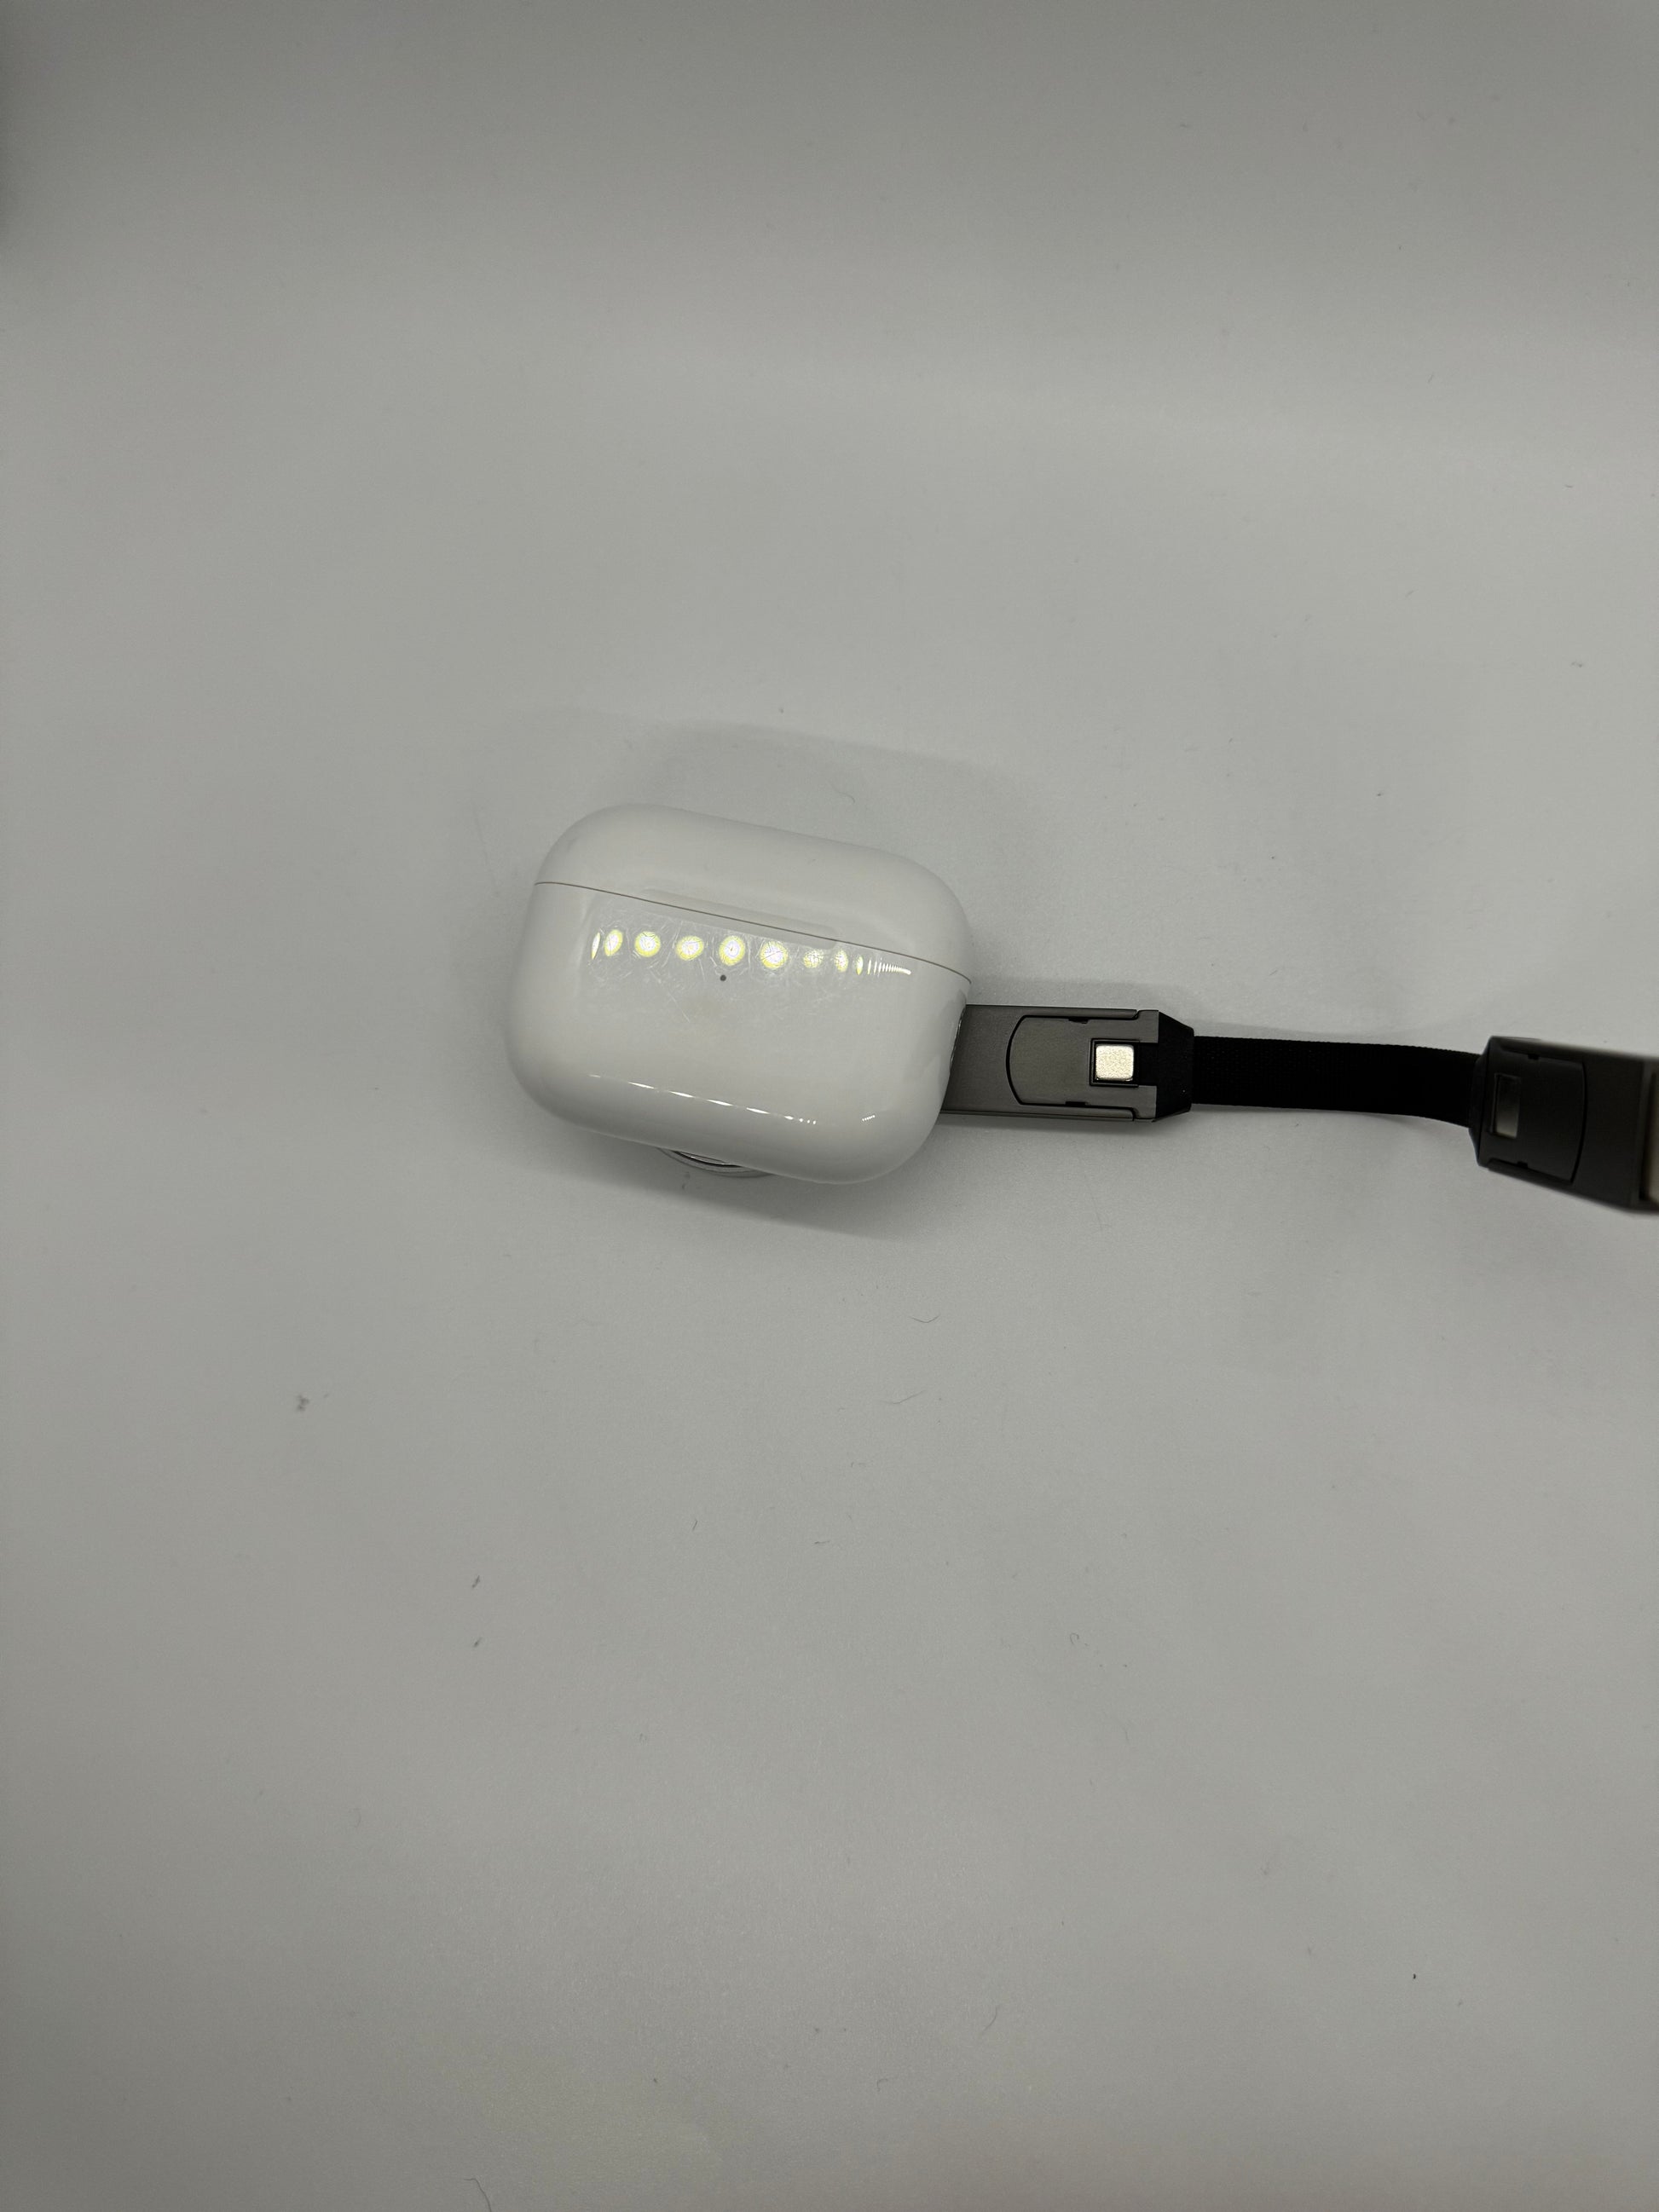 The picture shows a white AirPods case that is connected to a black charging cable. The case is in the bottom right corner of the image and the cable extends from the bottom of the case to the right edge of the image. The case has a small row of LED lights on the front, which are glowing, indicating that it is being charged. The background is plain white.